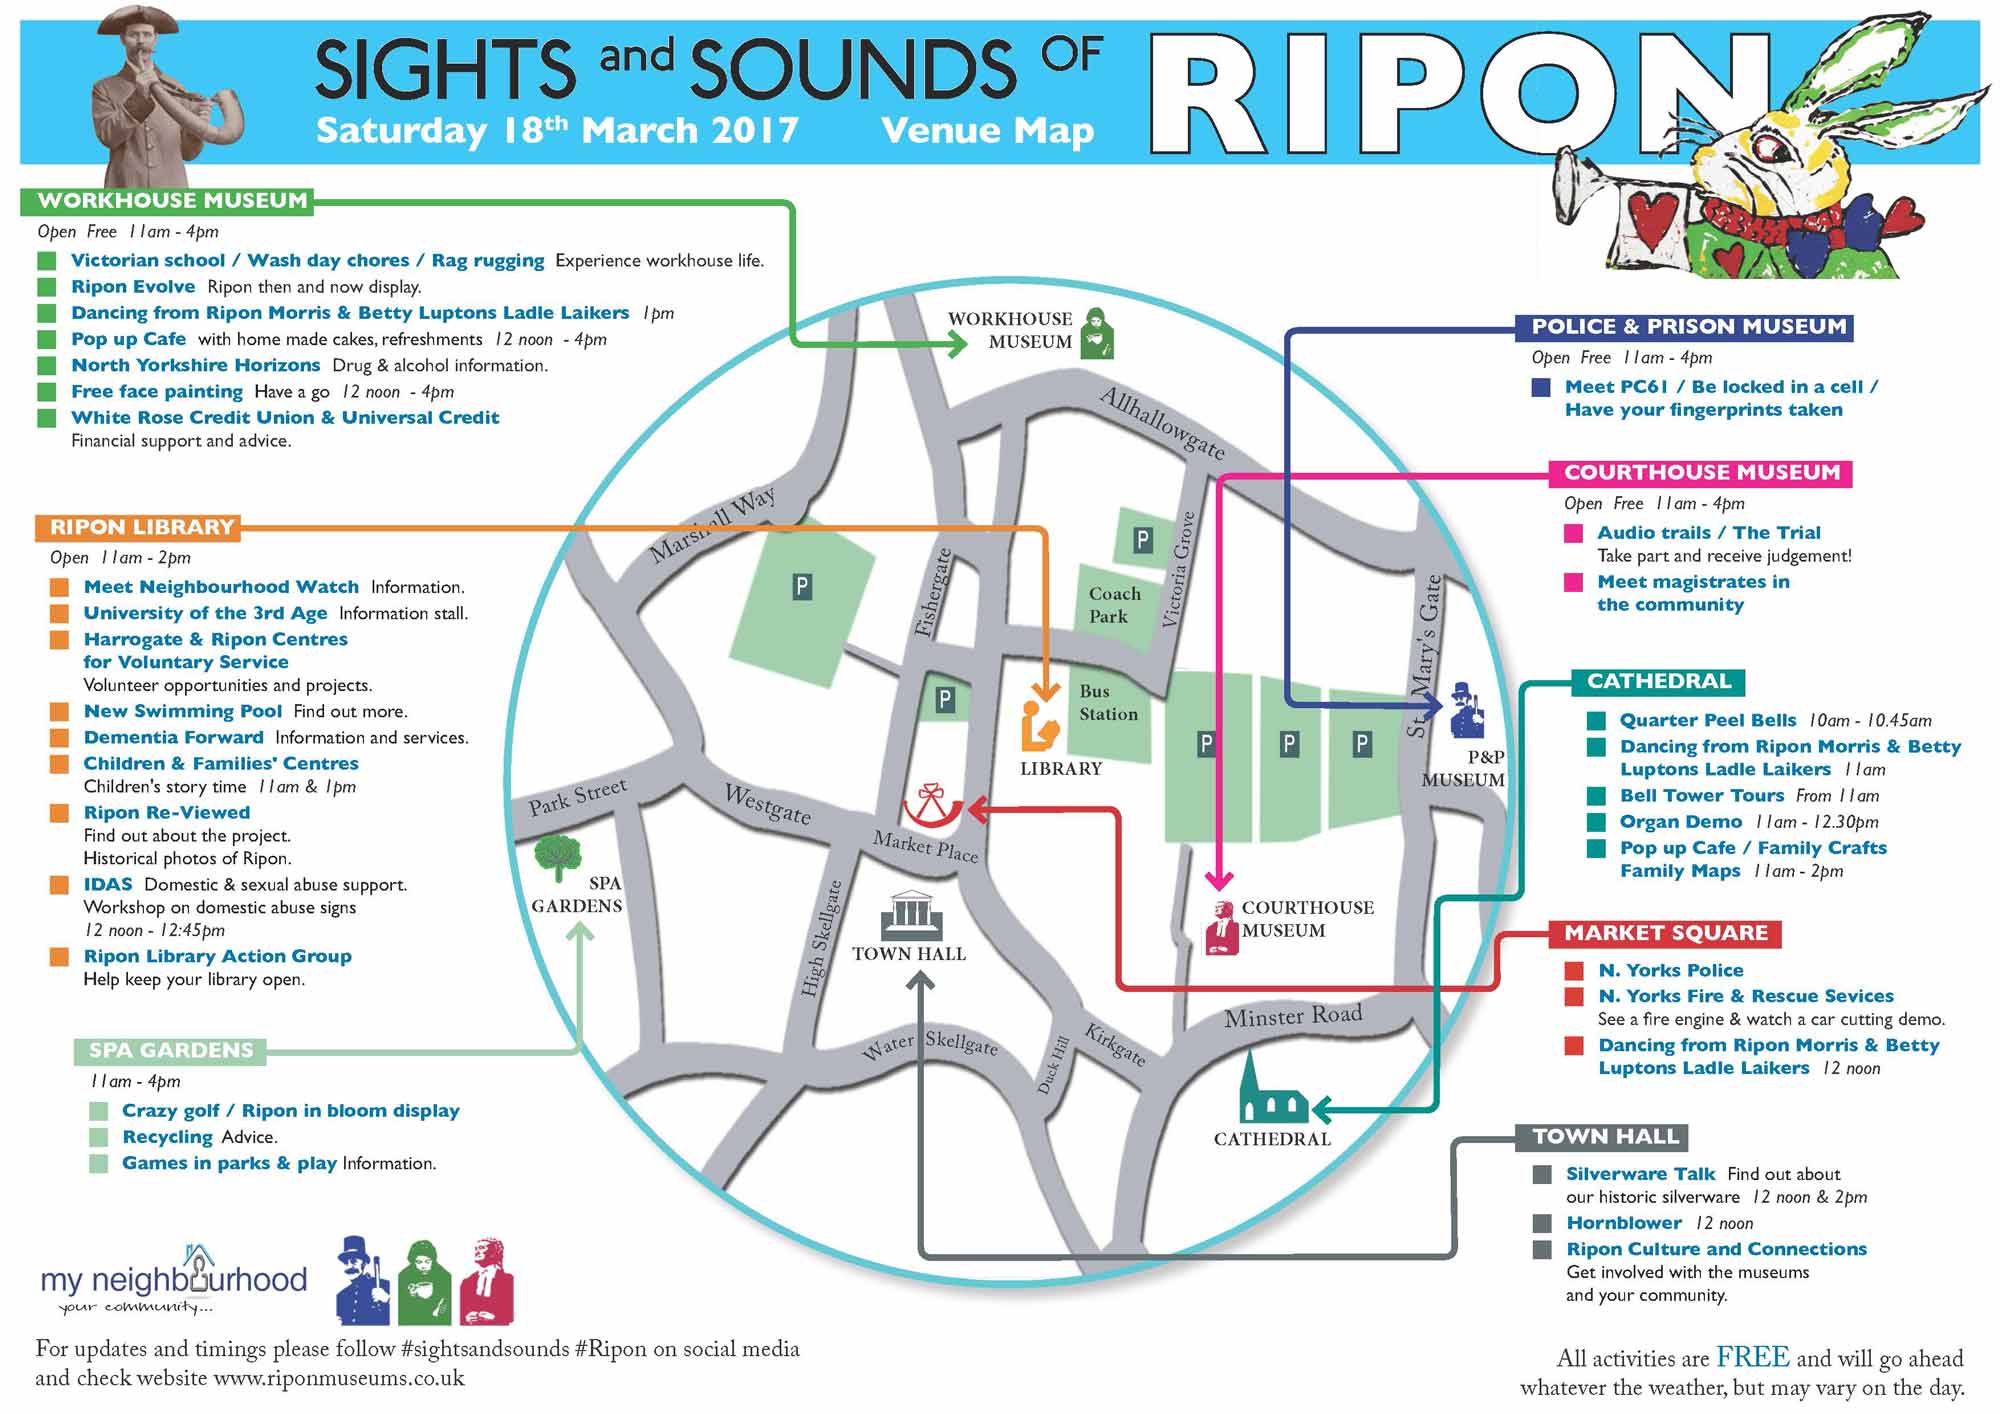 More Sights and Sounds of Ripon than ever at free family friendly event